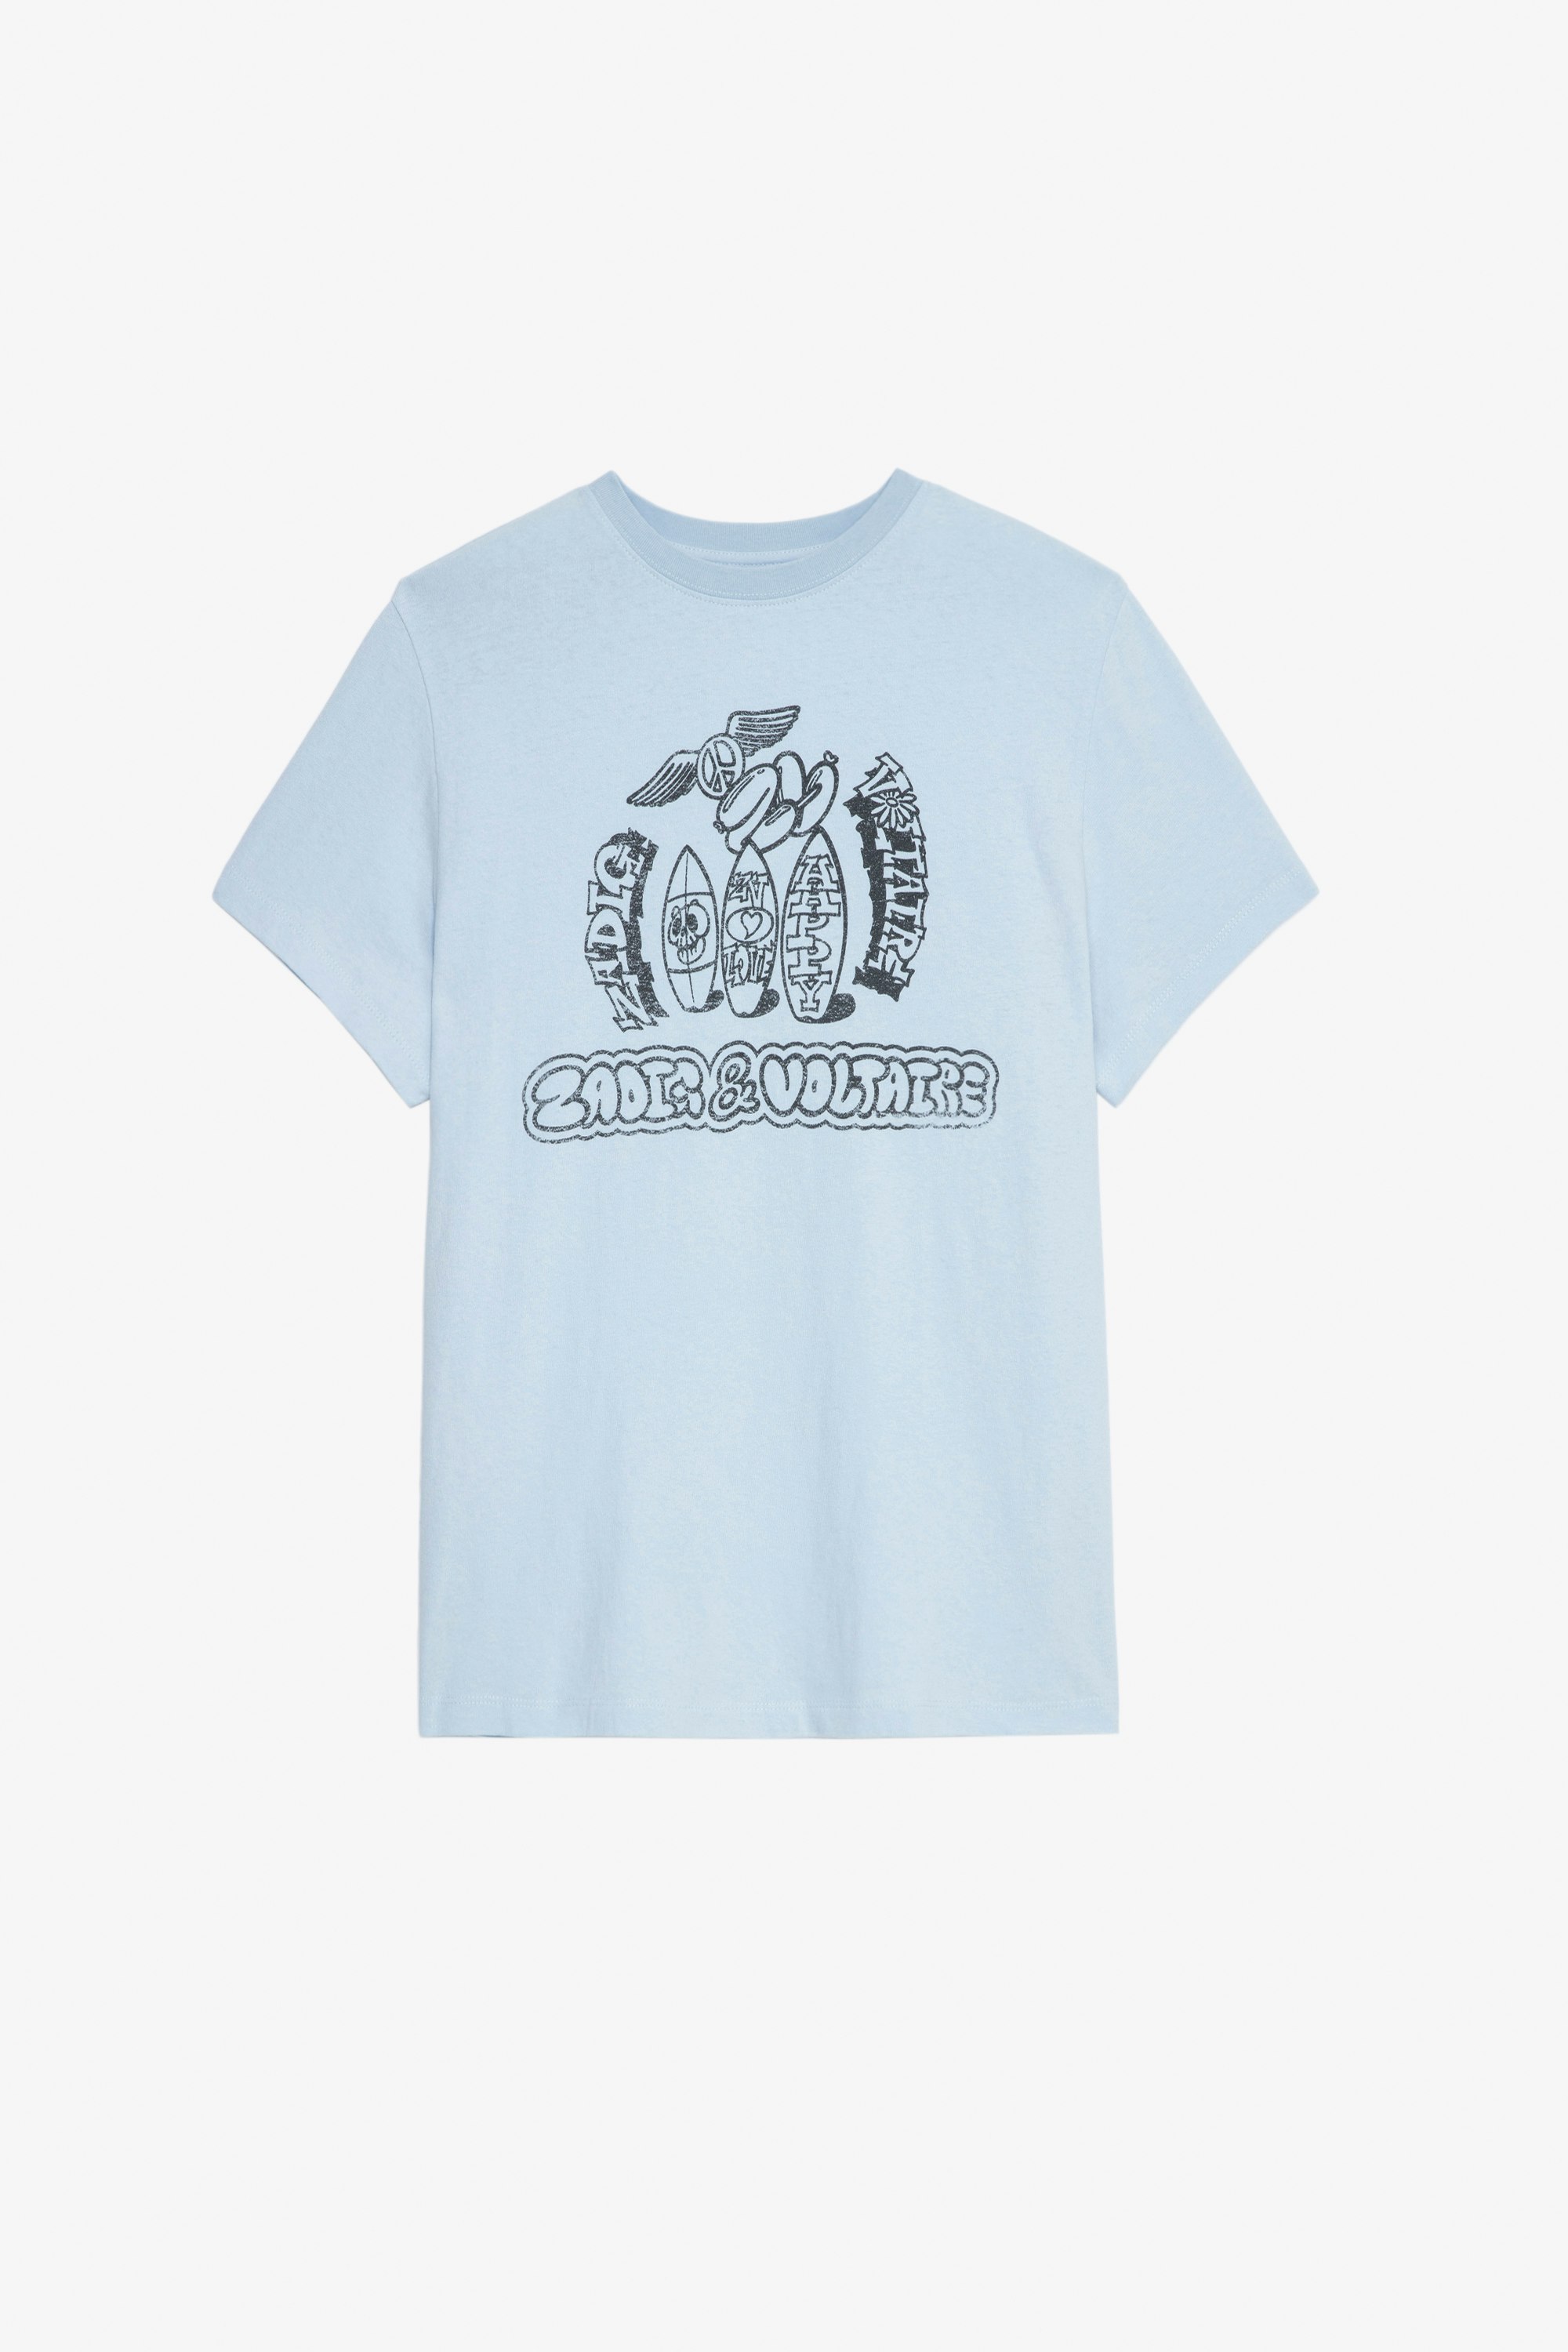 Omma T-Shirt Women’s sky-blue cotton T-shirt featuring a Core Cho print on the front and back